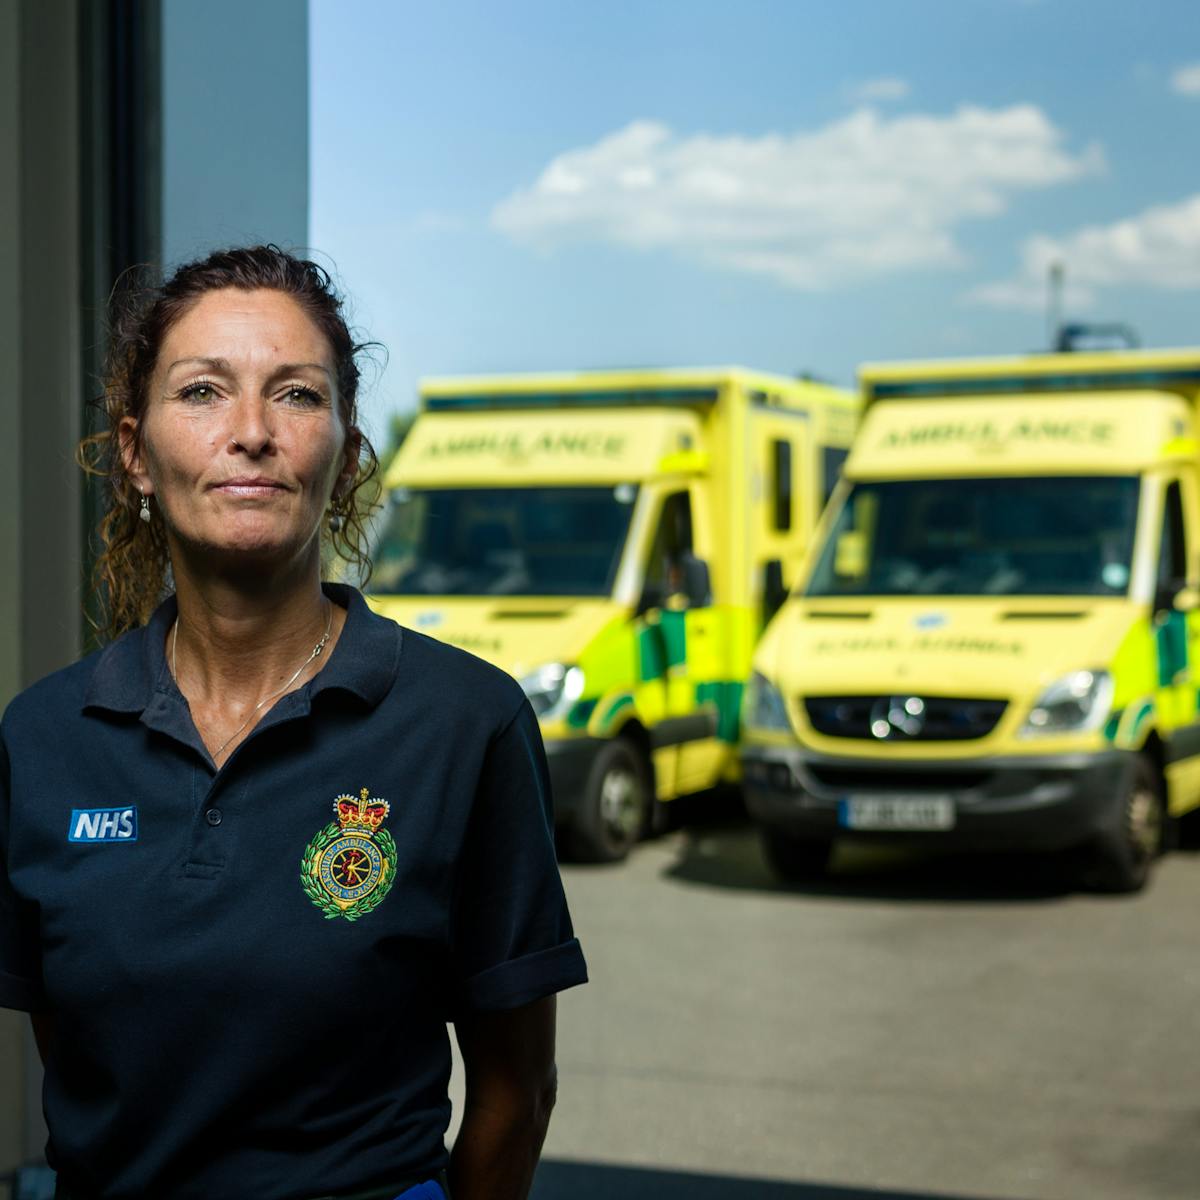 Photographic portrait of Mandy English, paramedic, at Hull East Ambulance Station, with ambulances in the background.